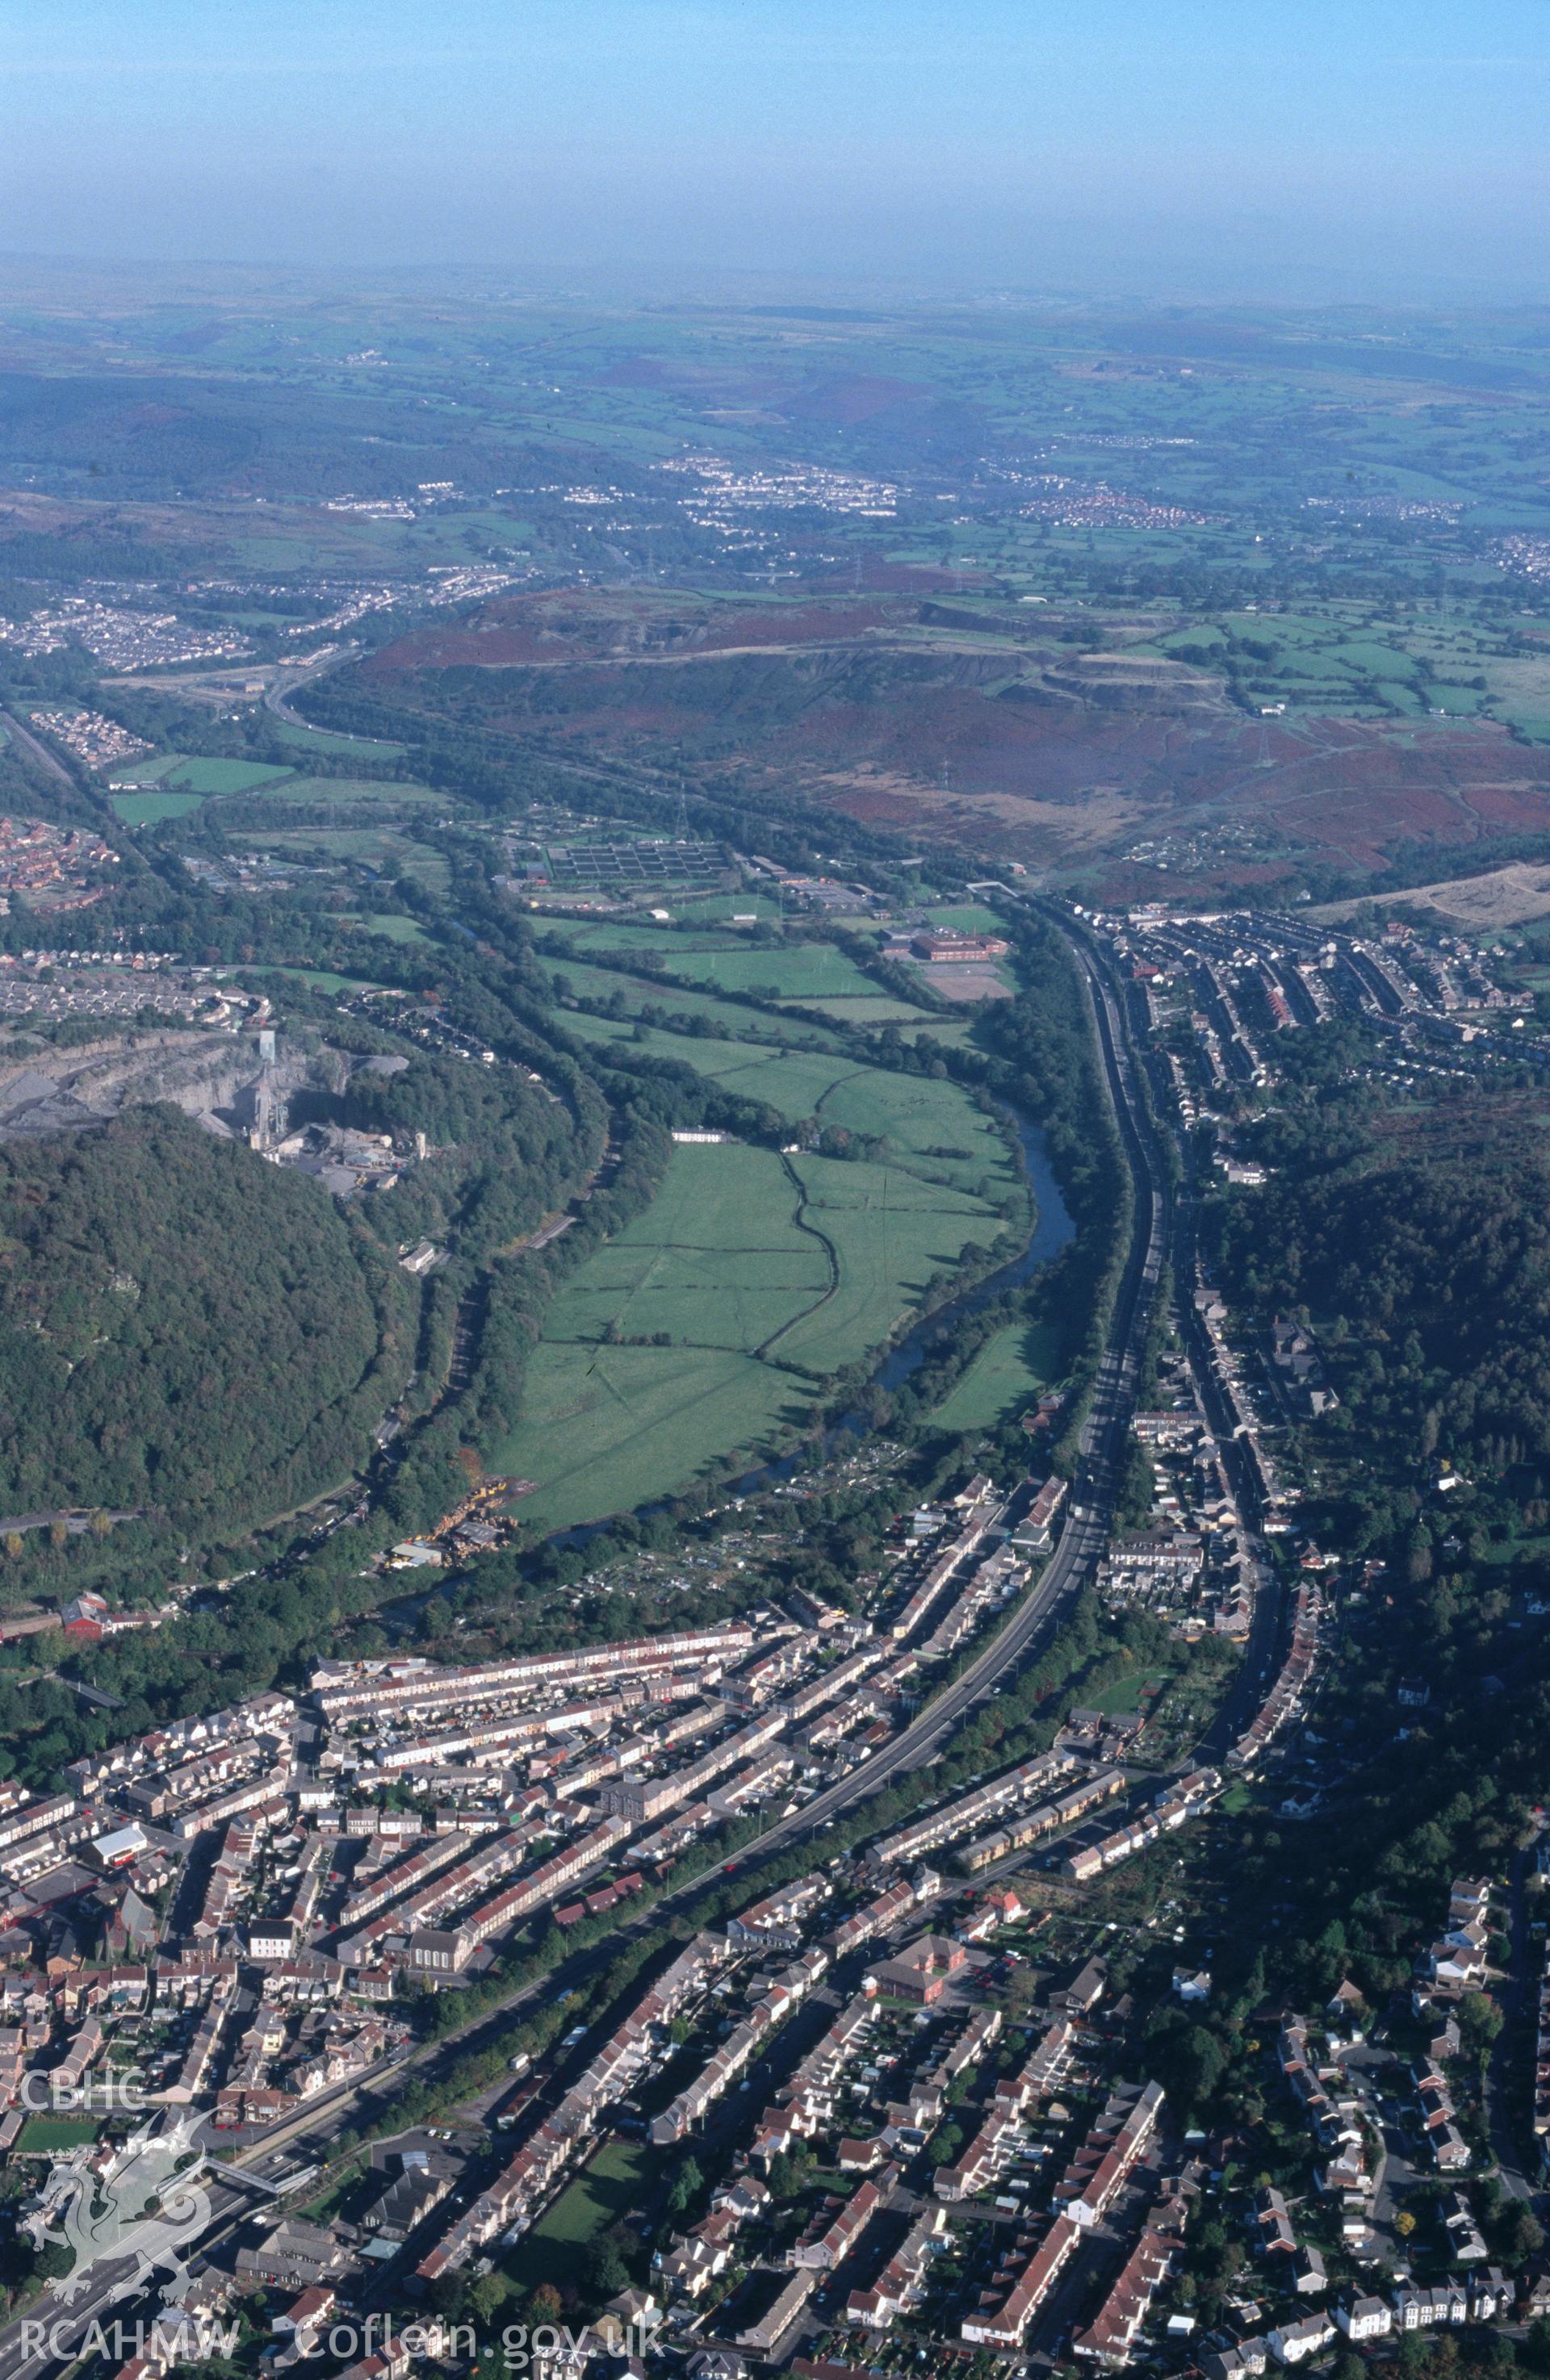 Slide of RCAHMW colour oblique aerial photograph of Pontypridd, taken by T.G. Driver, 13/10/1999.